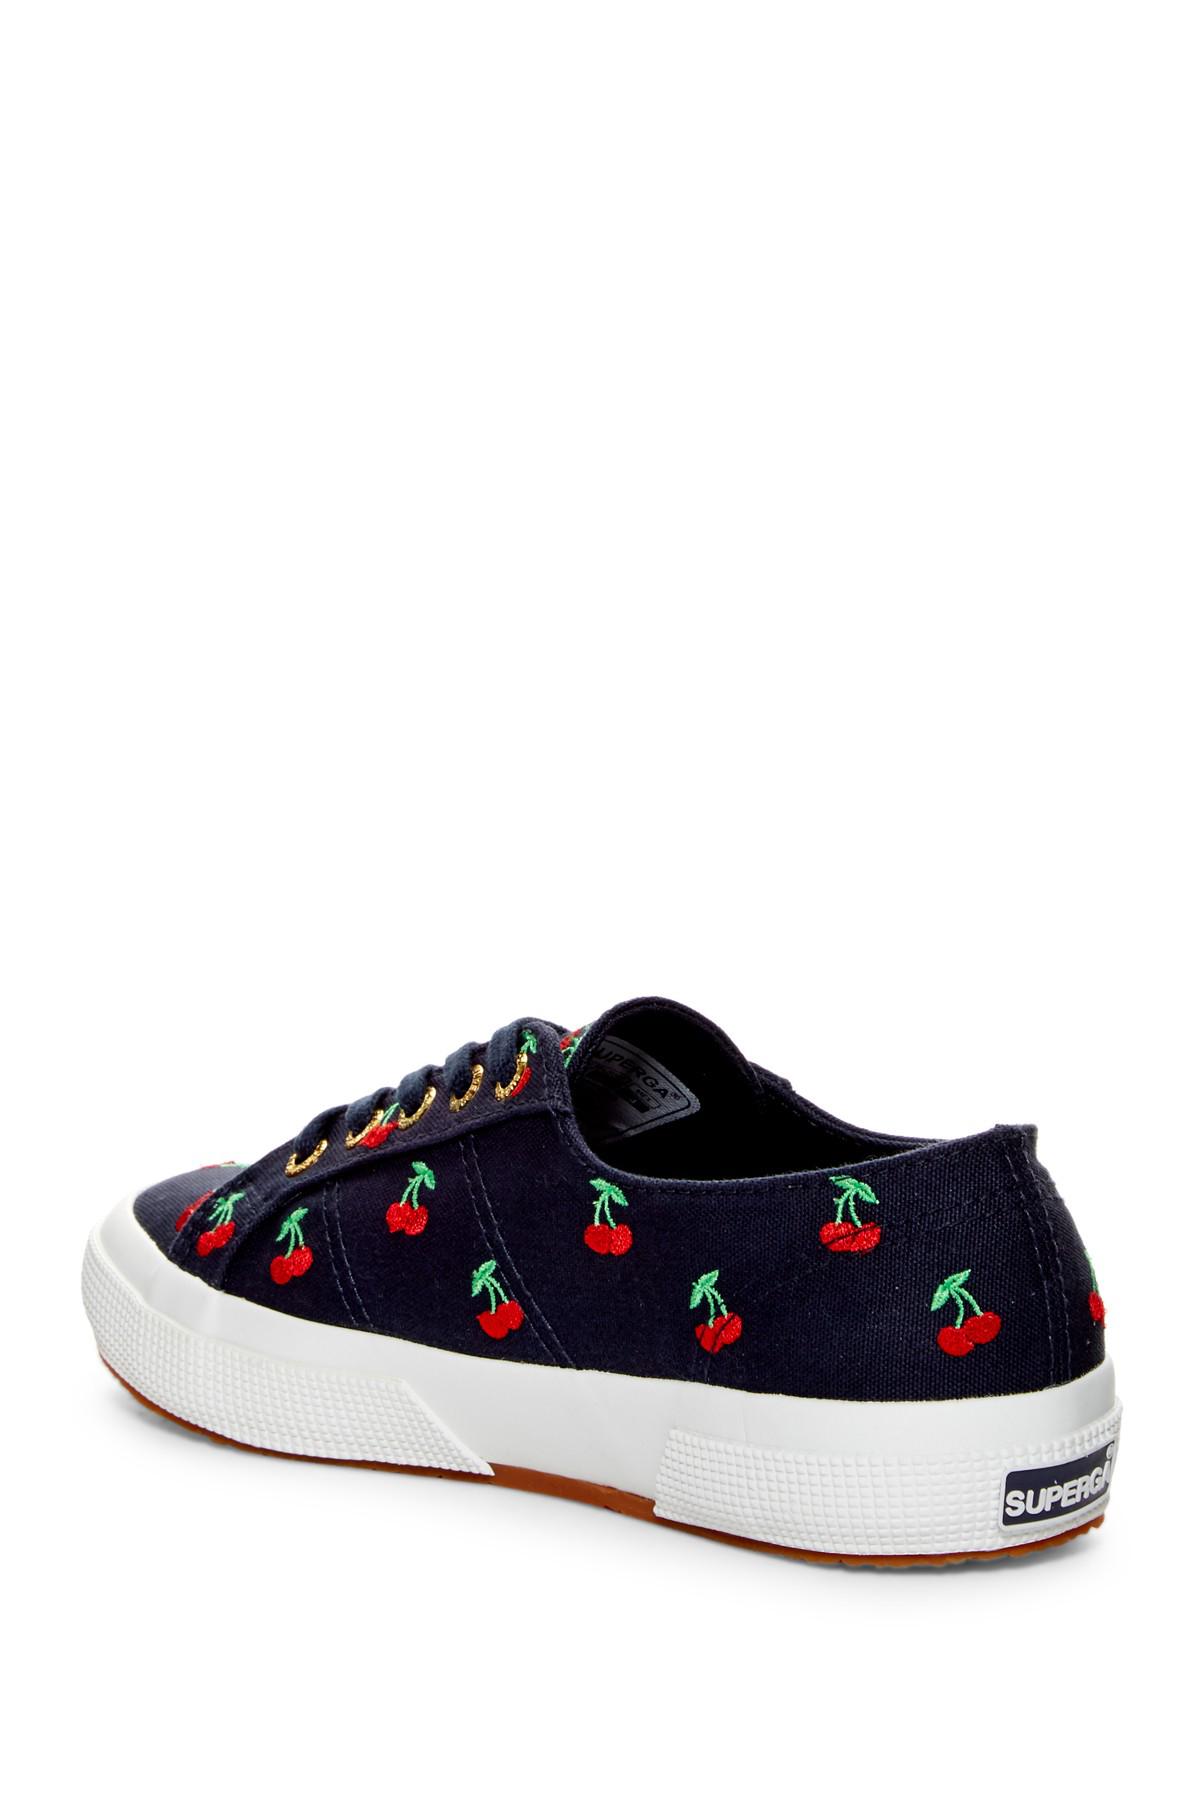 Superga Lace Cherry Pattern Sneaker in 